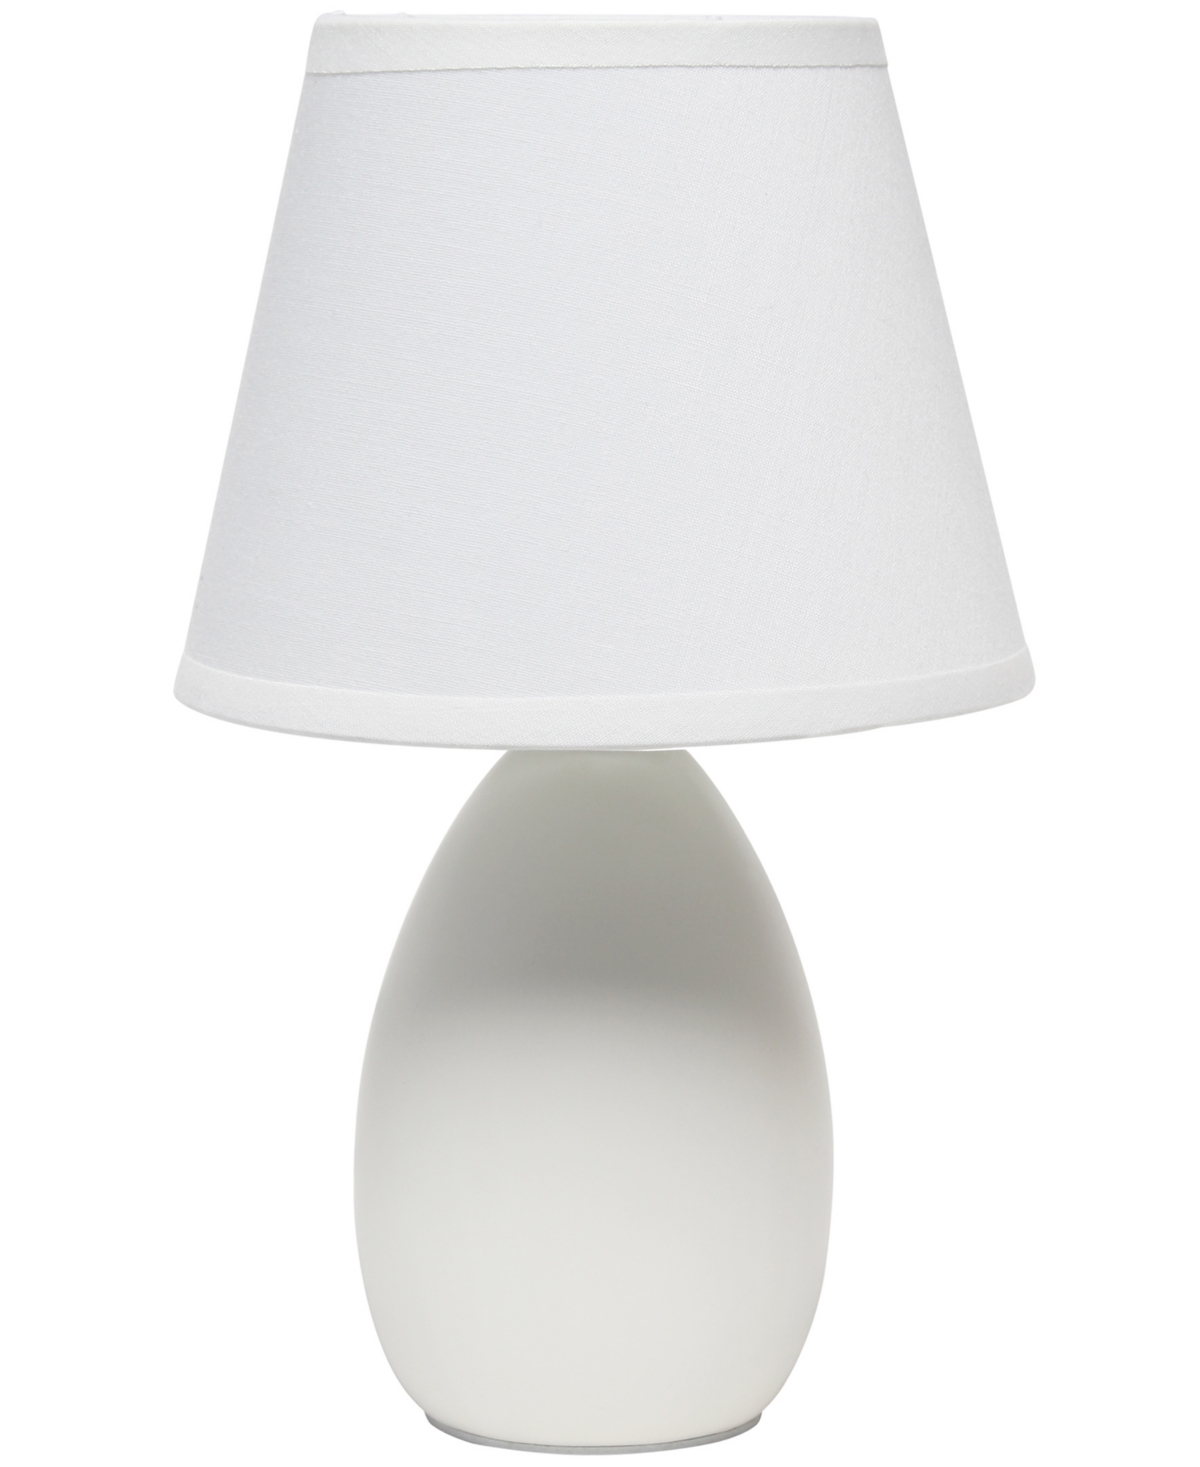 Shop Creekwood Home Nauru 9.45" Traditional Petite Ceramic Oblong Bedside Table Desk Lamp With Tapered Drum Fabric Shade In Off White